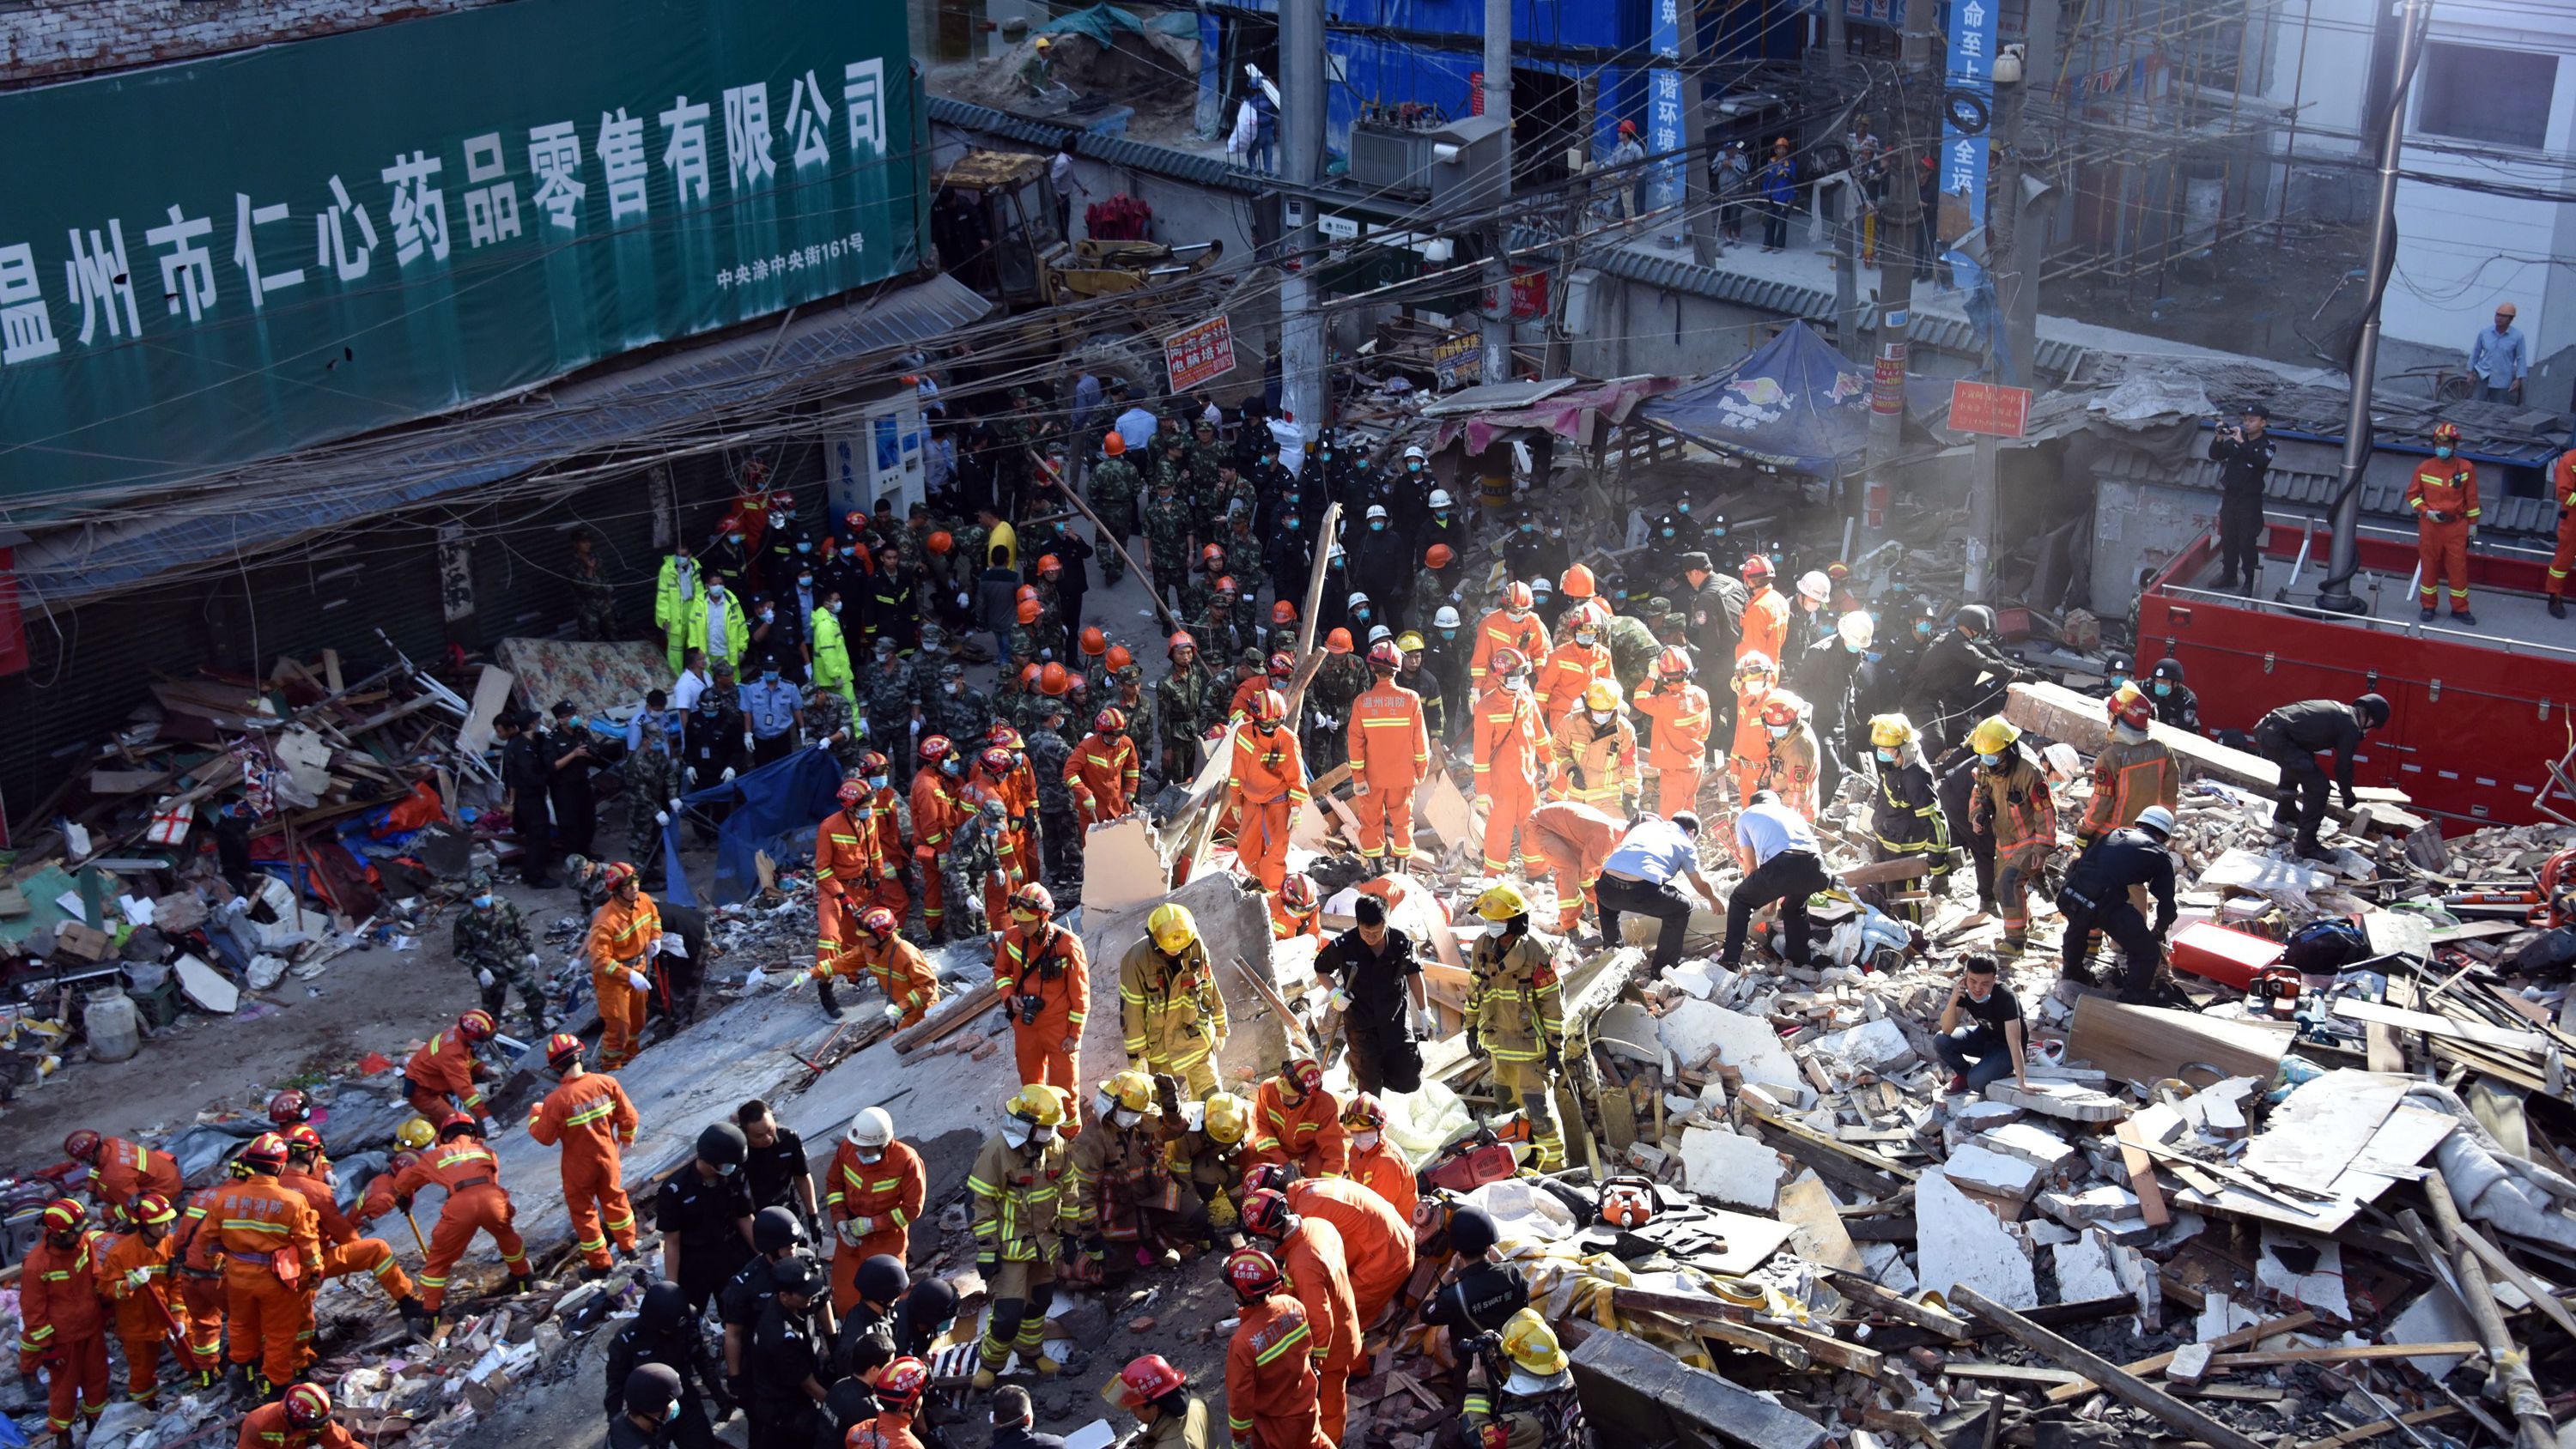 Rescuers search for survivors at an accident site after four buildings caved in during the early hours in Wenzhou, eastern China's Zhejiang province on October 10.